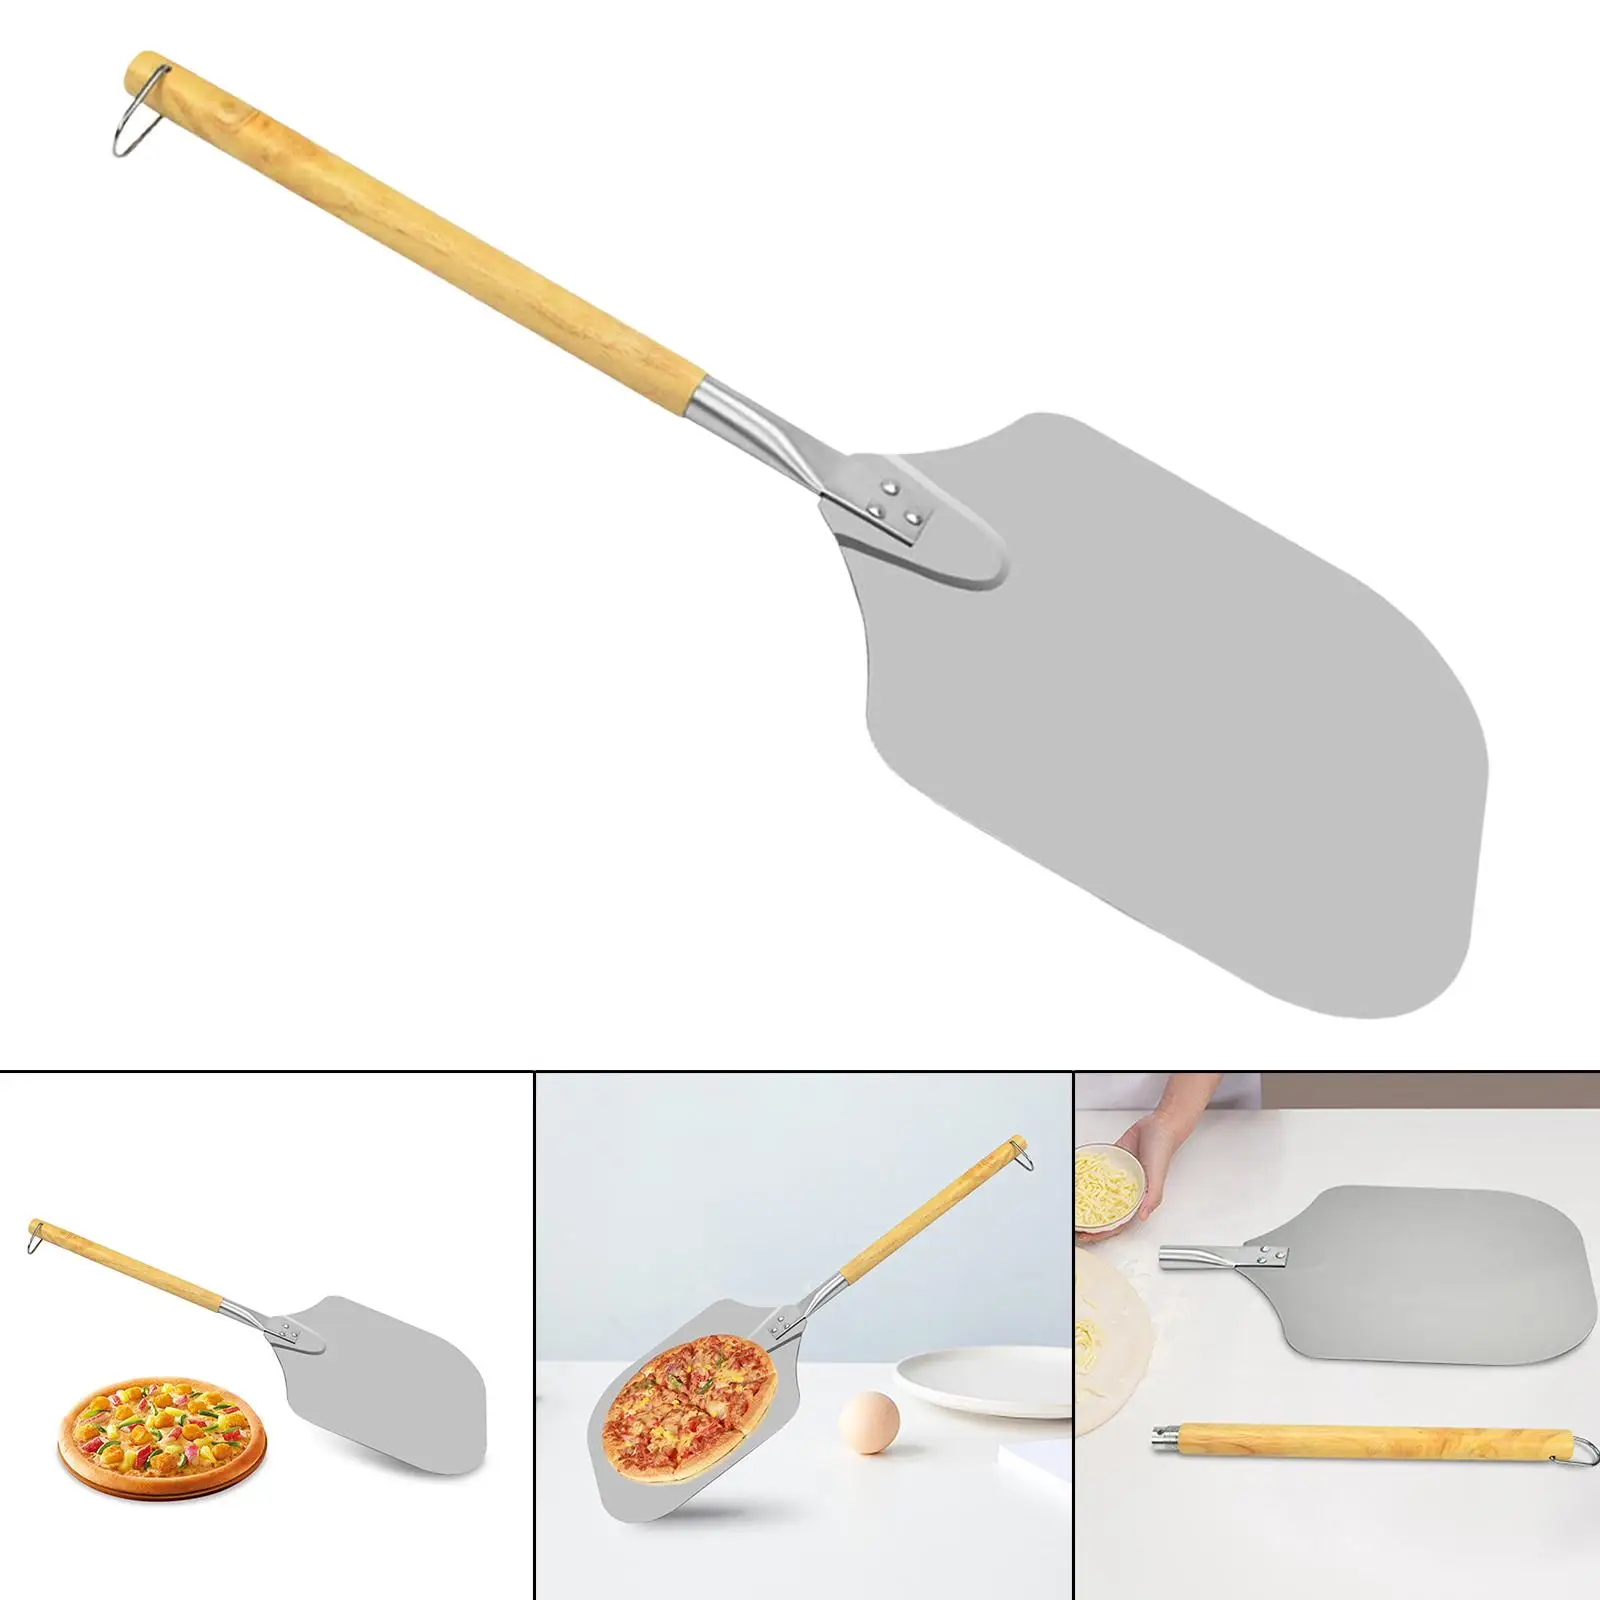 Practical Stainless Steel  Peel Wooden Handle for Bread Pastry Oven or Grill Use Kitchen Baking Tools  Spatula  Shovel